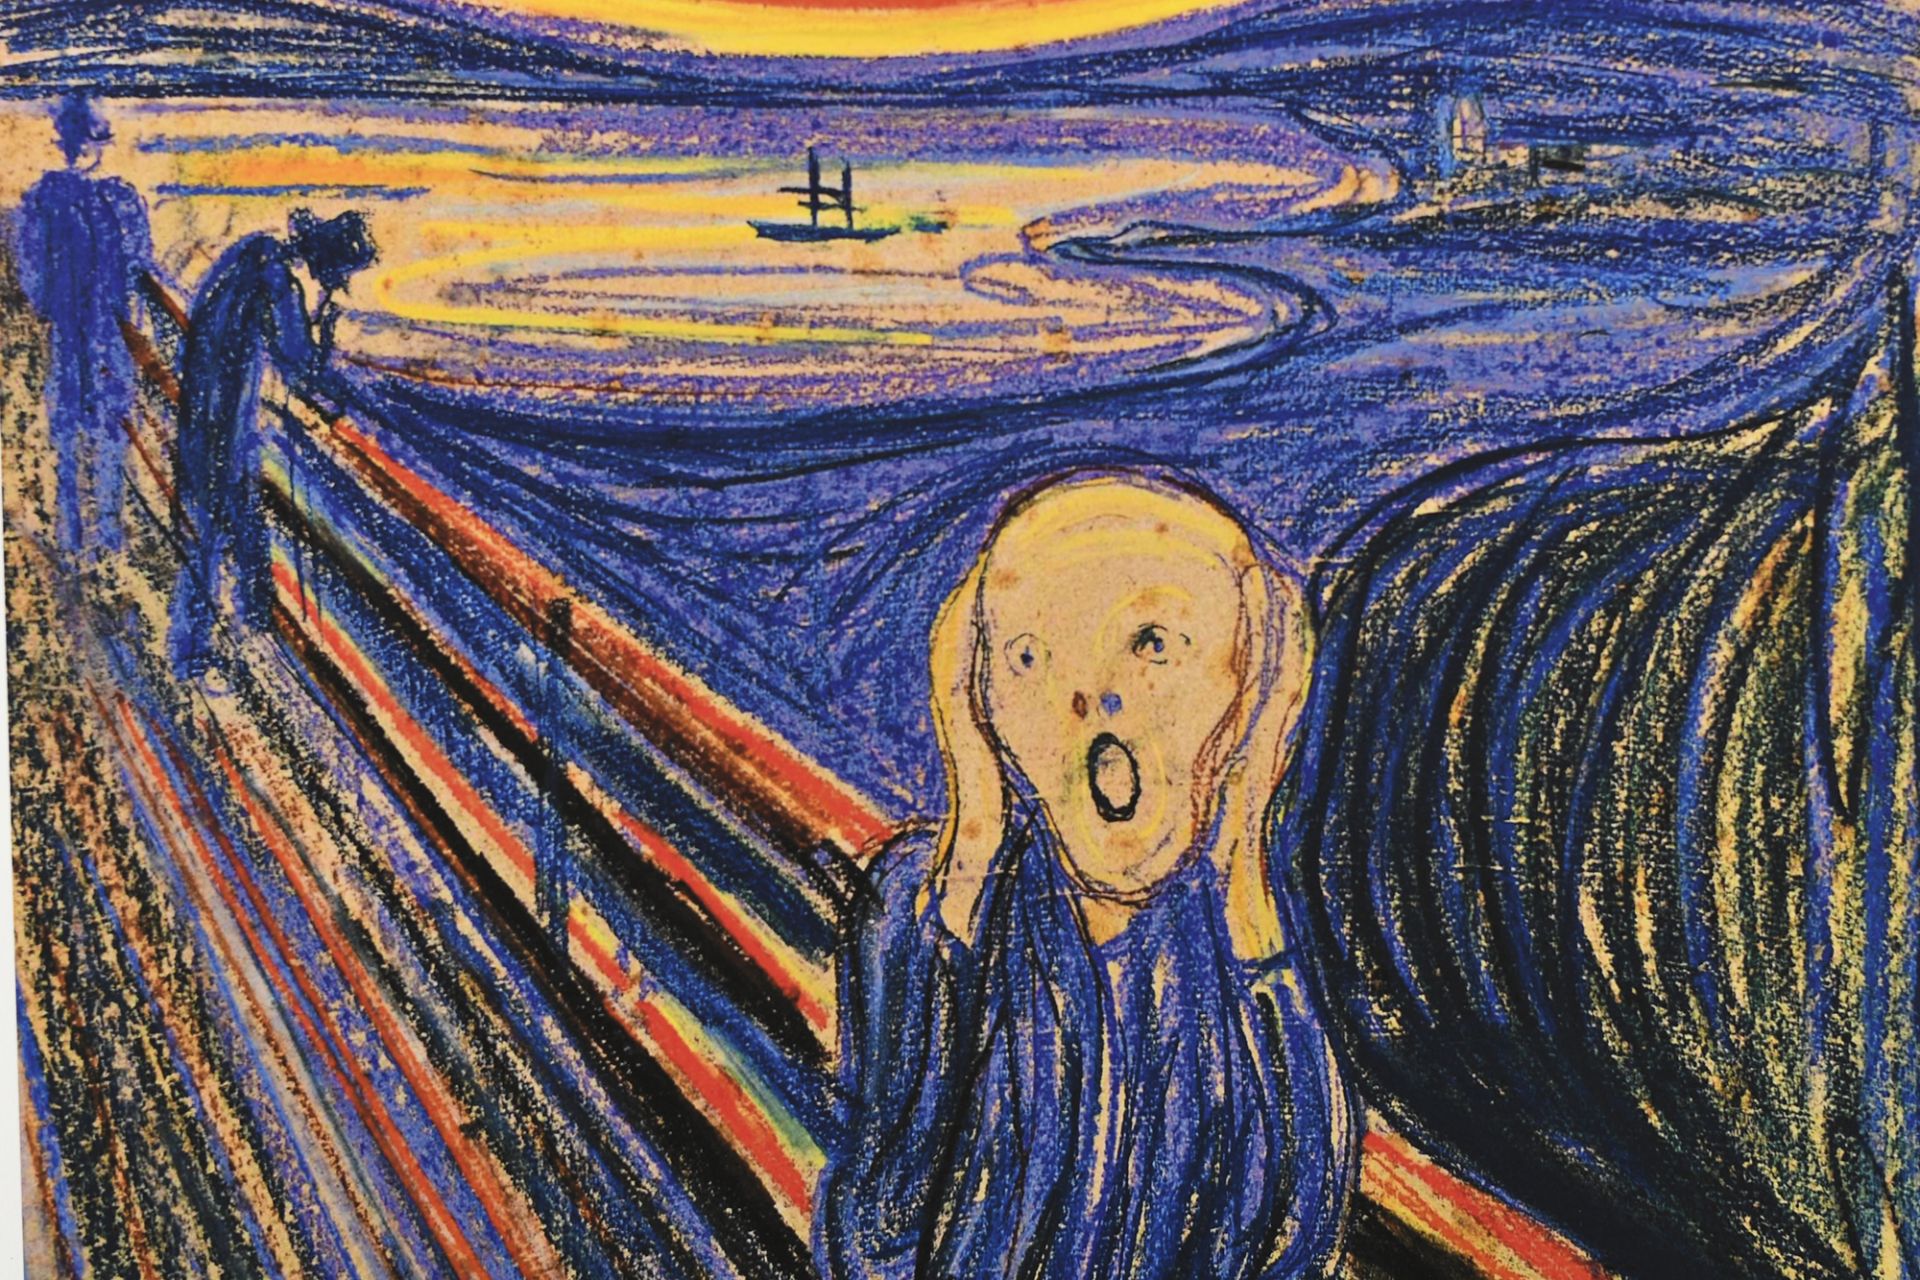 Edvard Munch Limited Edition "The Scream" - Image 6 of 10